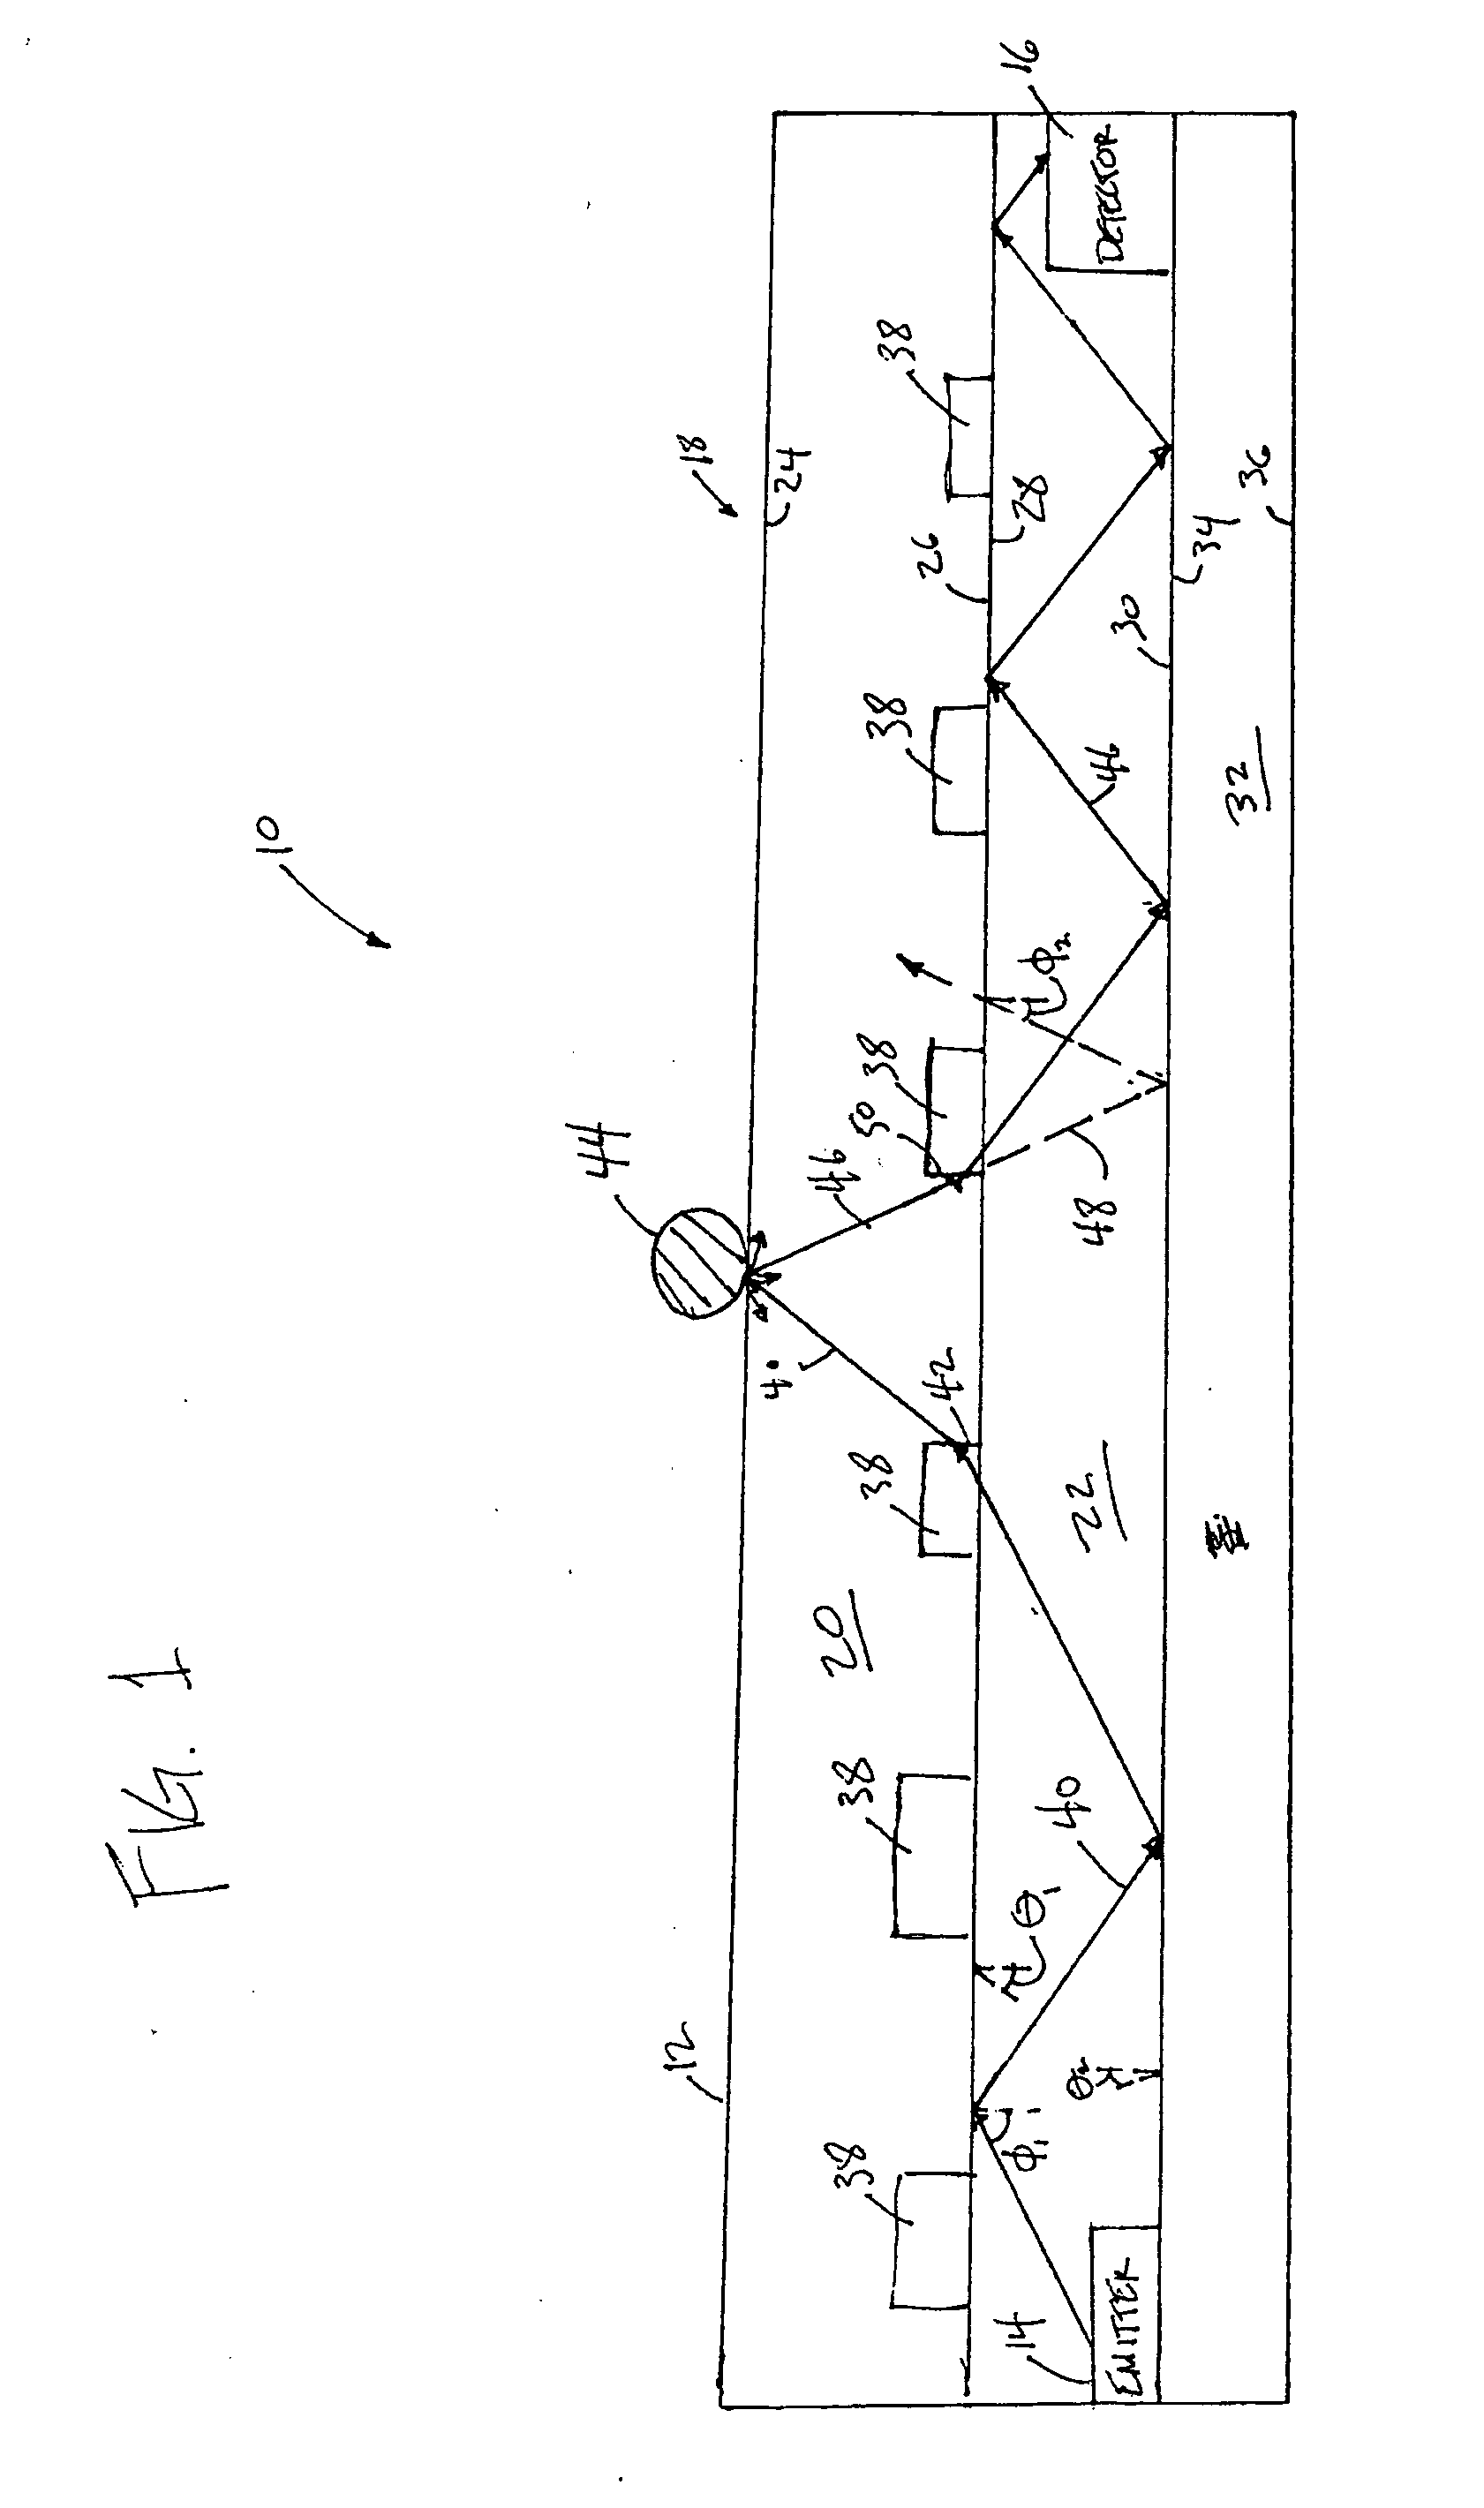 Optical touchpad system and waveguide for use therein